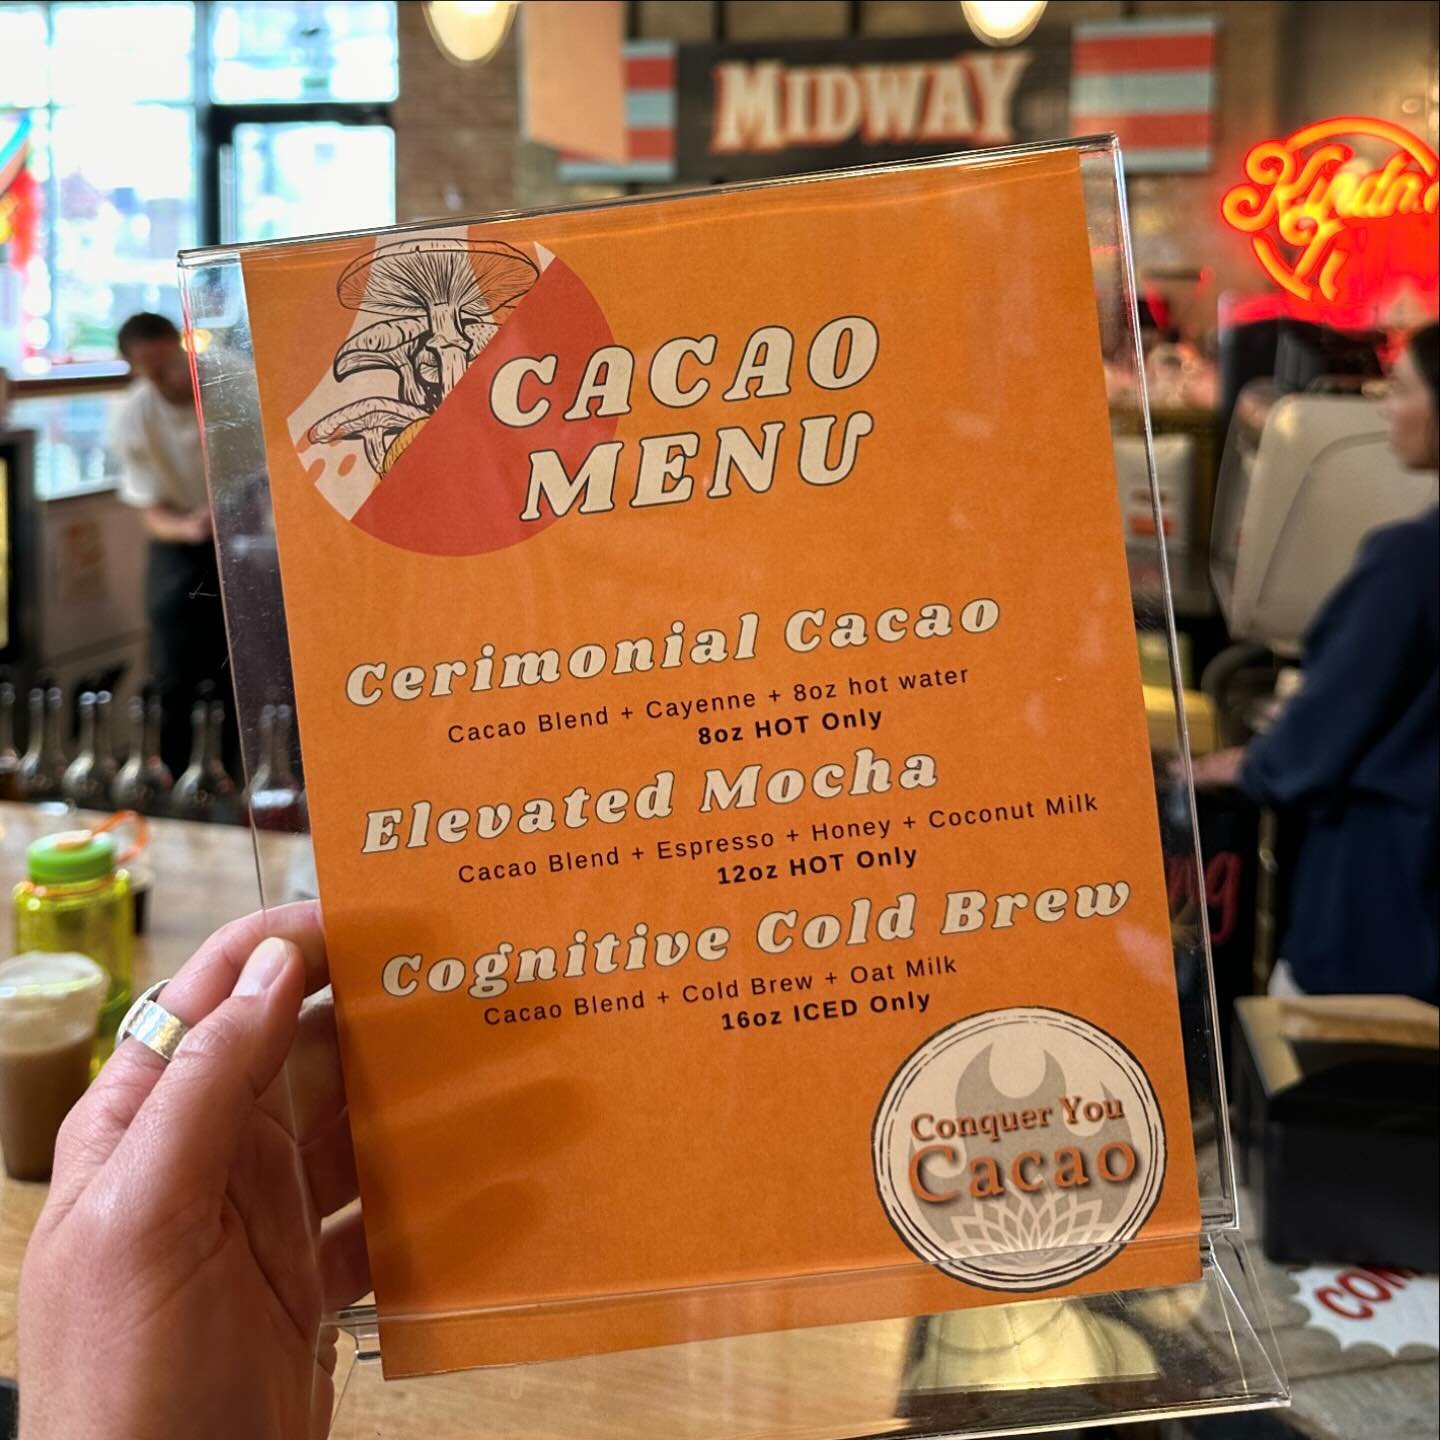 The new cacao menu at @midwayjerks in downtown Salt Lake! Snag your daily dose of cacao and mushrooms or pick up a bag to take home with you.